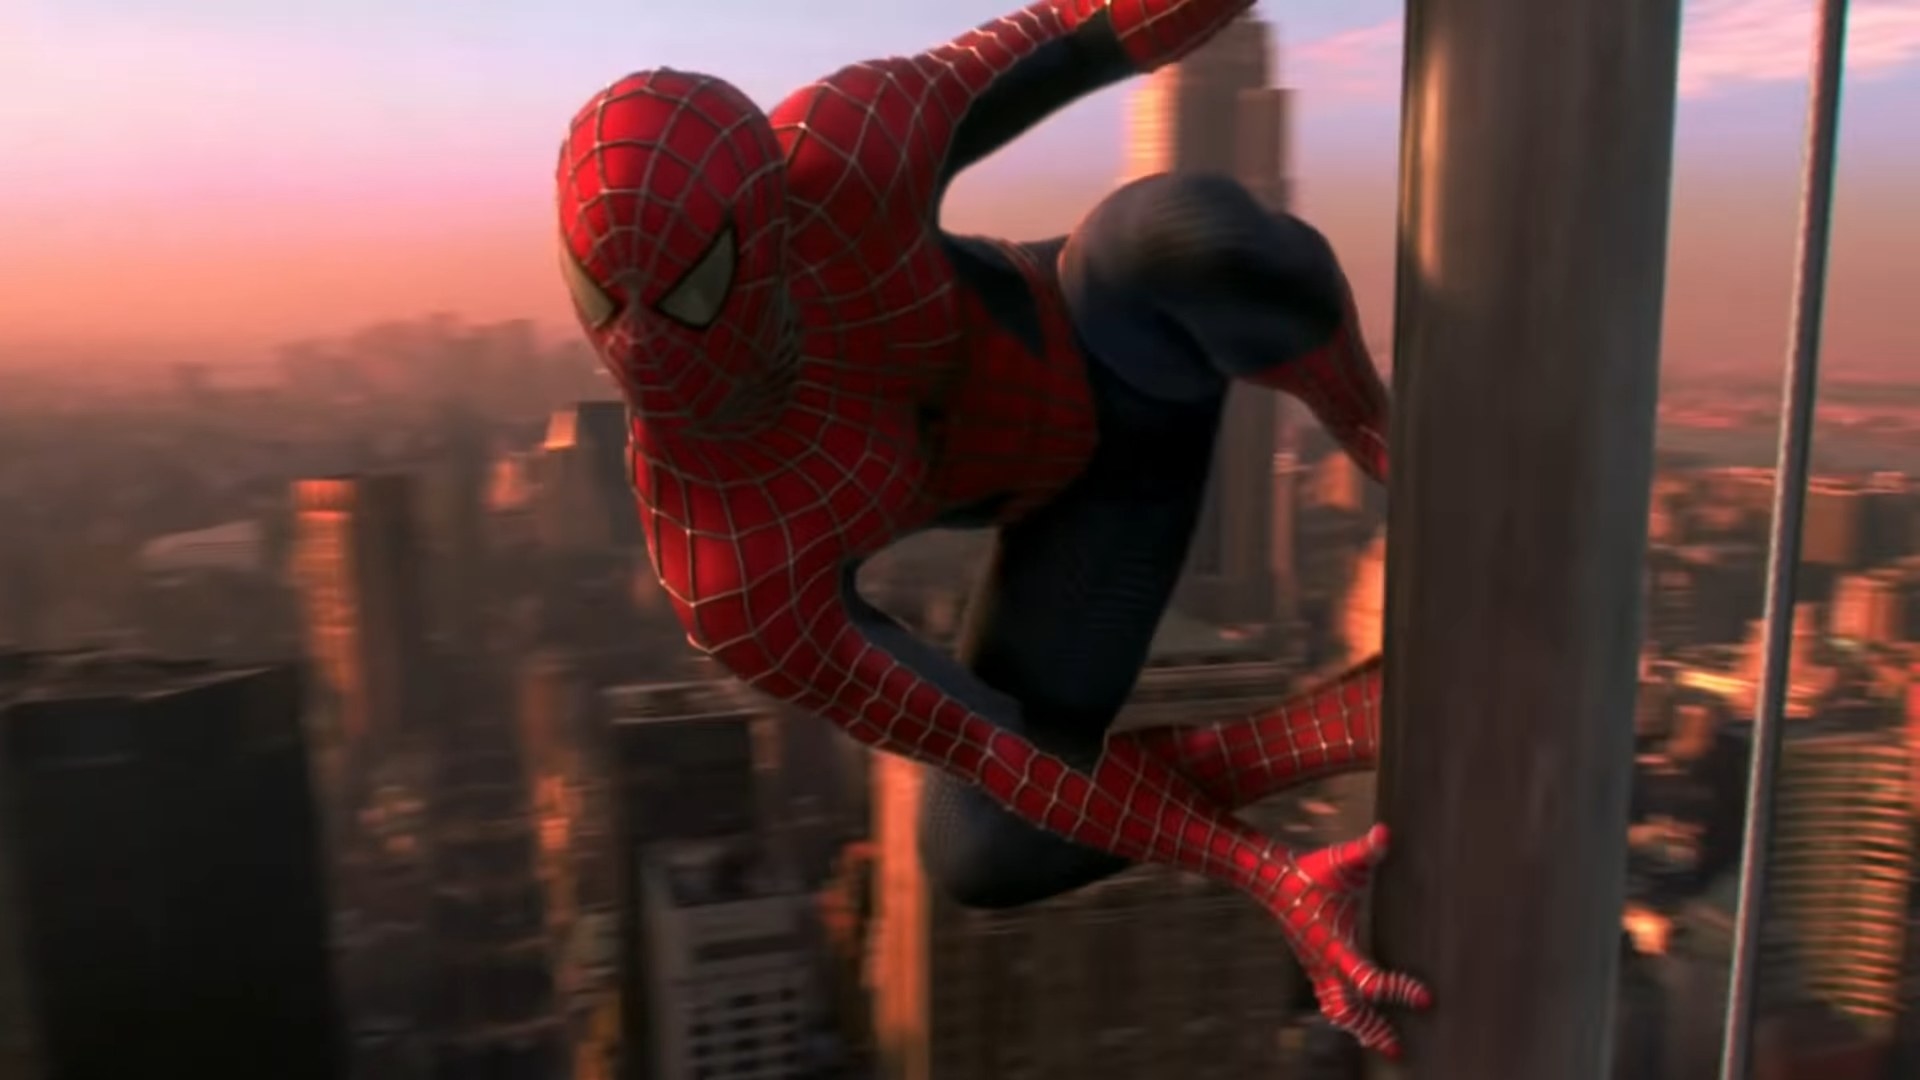 Spider-Man latched onto a flagpole in &quot;Spider-Man&quot;